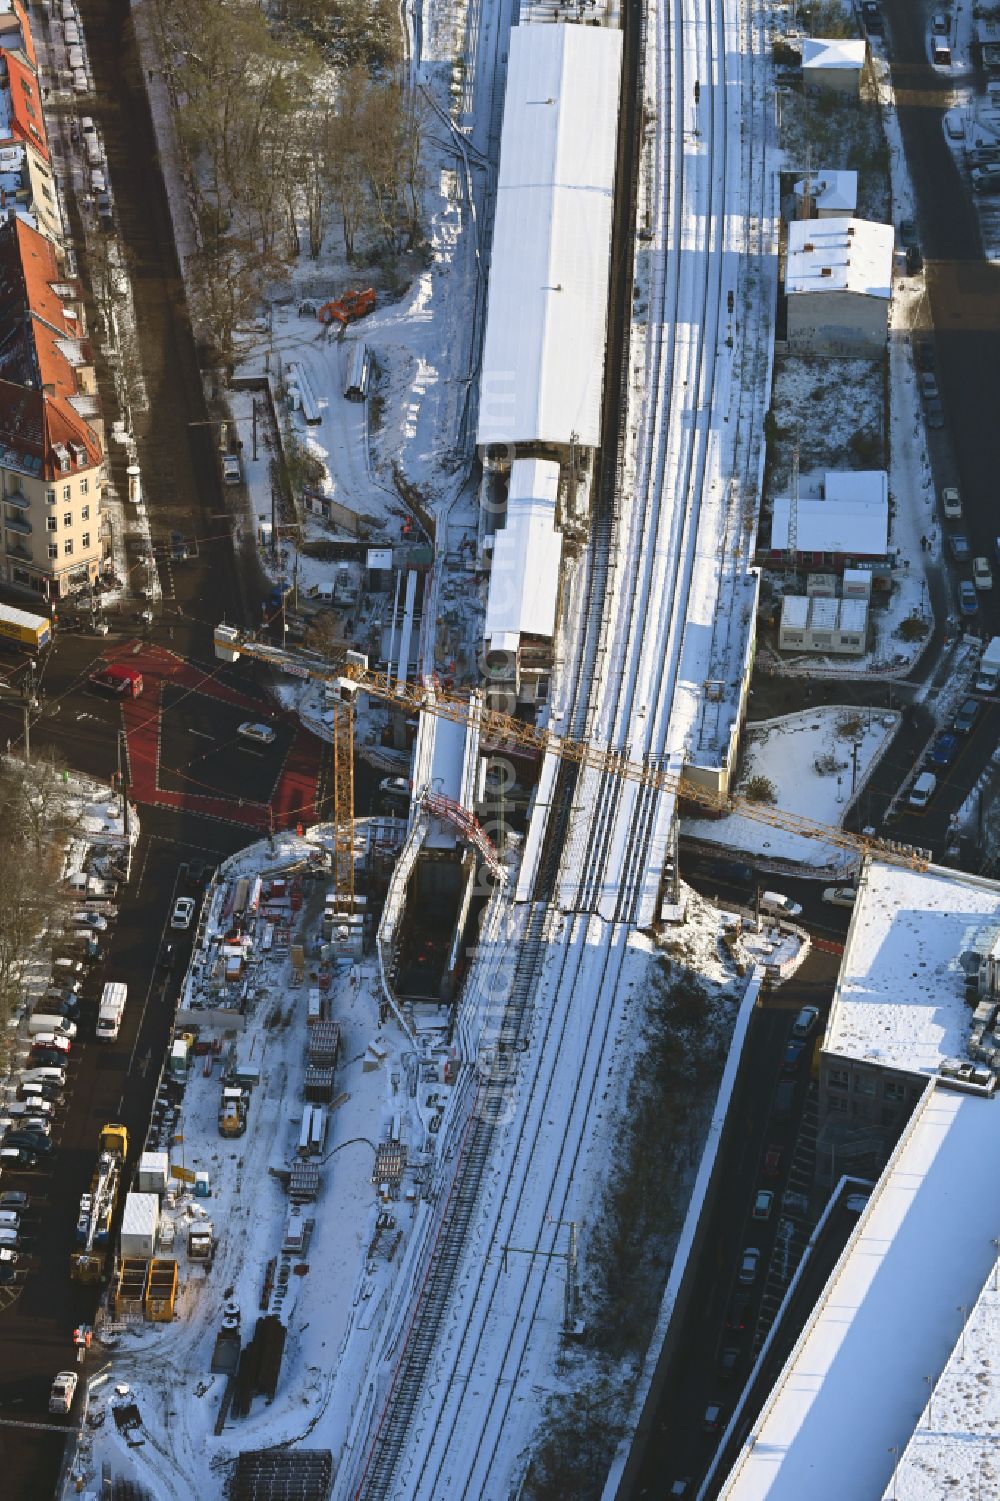 Berlin from above - Wintry snowy construction site for the assembly of the replacement railway bridge structure for the routing of the railway tracks at the train station on place Elcknerplatz - Bahnhofstrasse - Am Bahndamm in the district Koepenick in Berlin, Germany